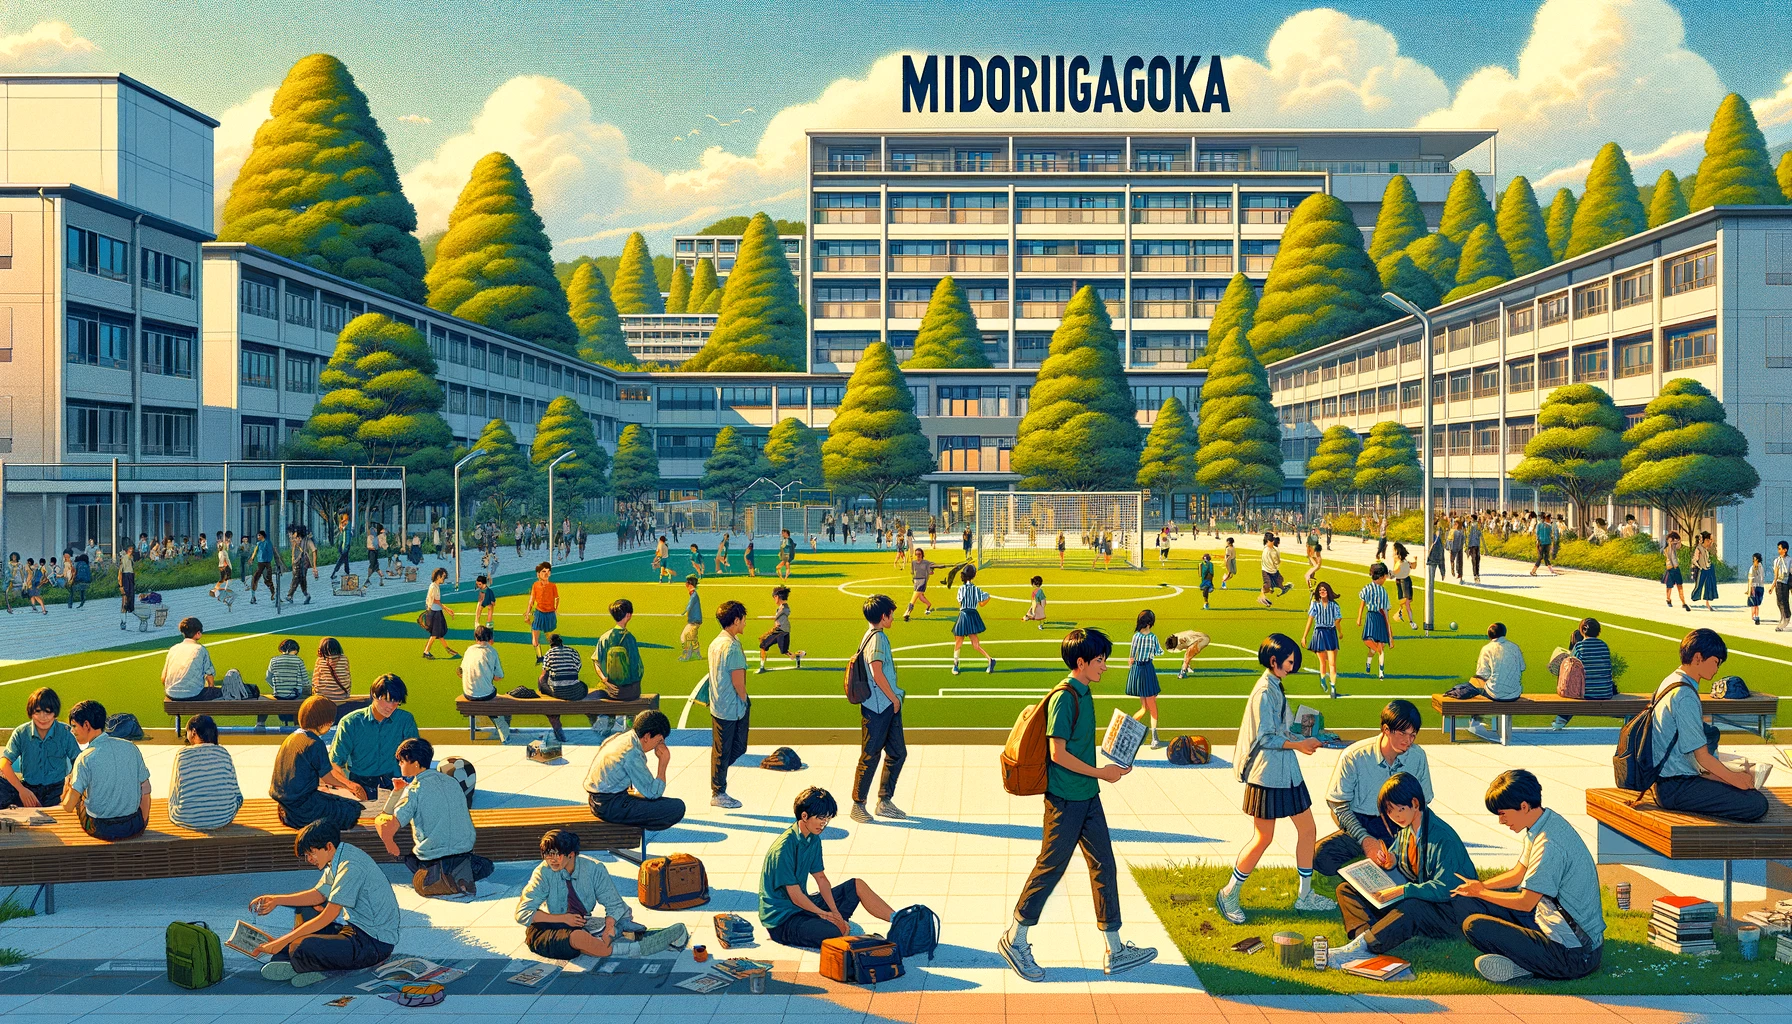 A lively campus scene at Midorigaoka High School, showcasing its popularity. The image features a group of students from diverse backgrounds engaged in various activities around a green and spacious campus. Some students are studying under the shade of large trees, others are participating in a sports practice, and a few are relaxing and chatting in outdoor seating areas. The school buildings in the background blend modern and traditional architectural elements. The word 'MIDORIGAOKA' is prominently displayed in bold English letters, reflecting the school's vibrant community and educational spirit.